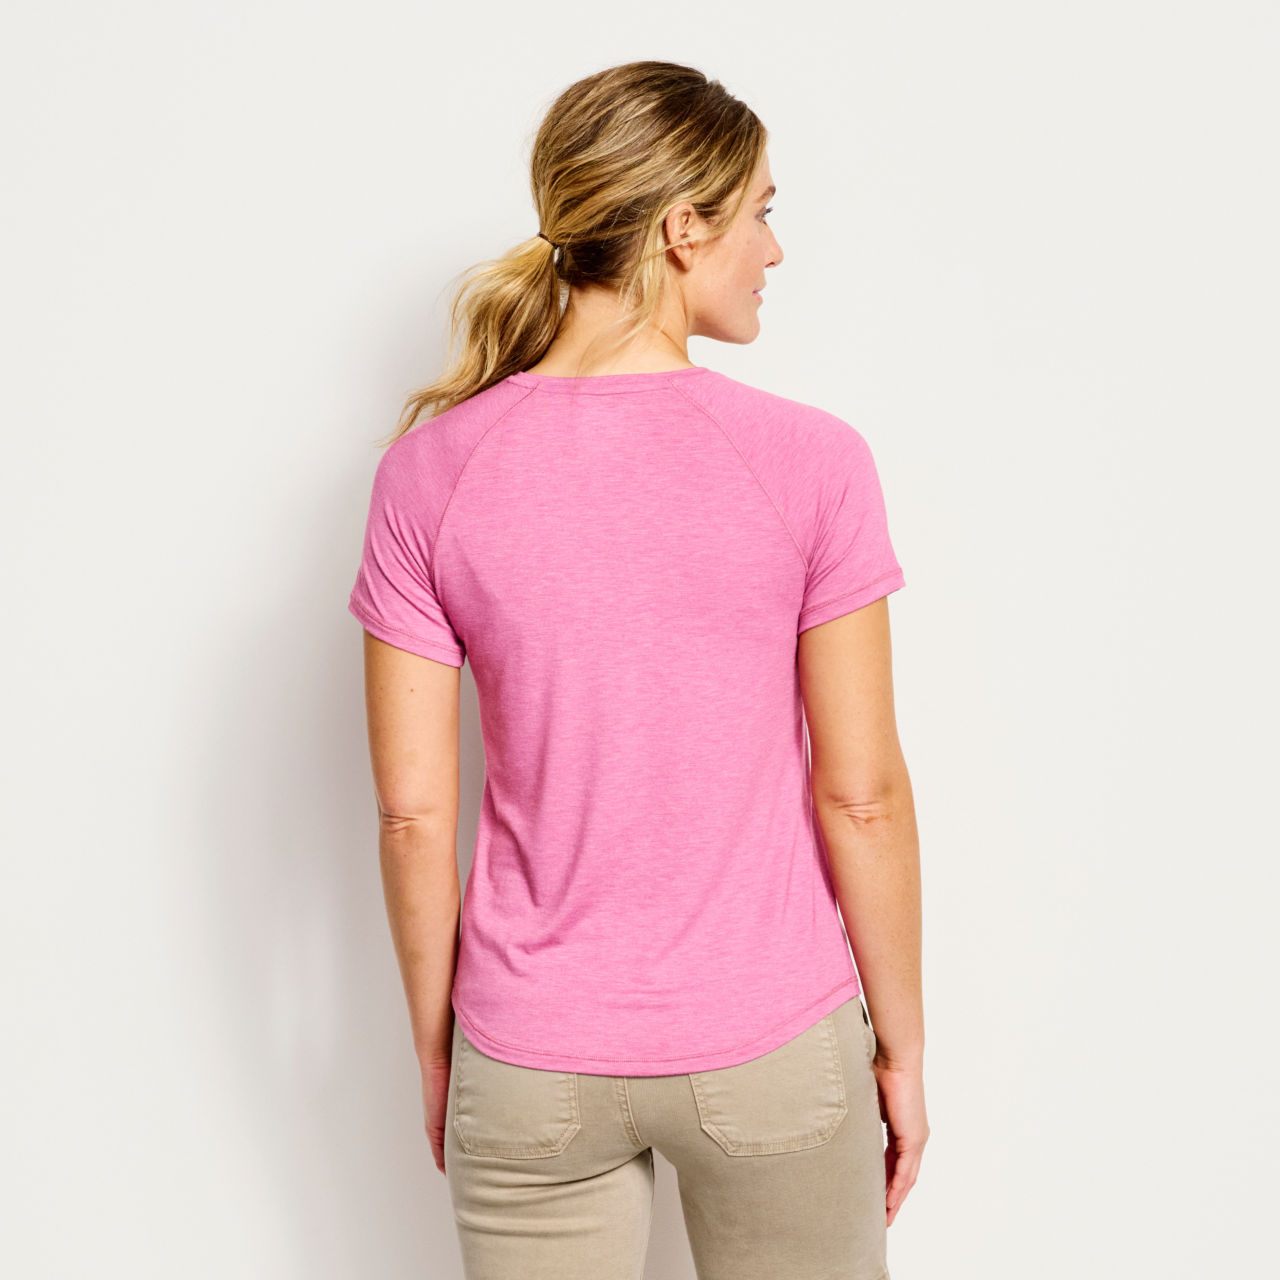 Women's DriCast™ Short-Sleeved Tee - PUNCH image number 2